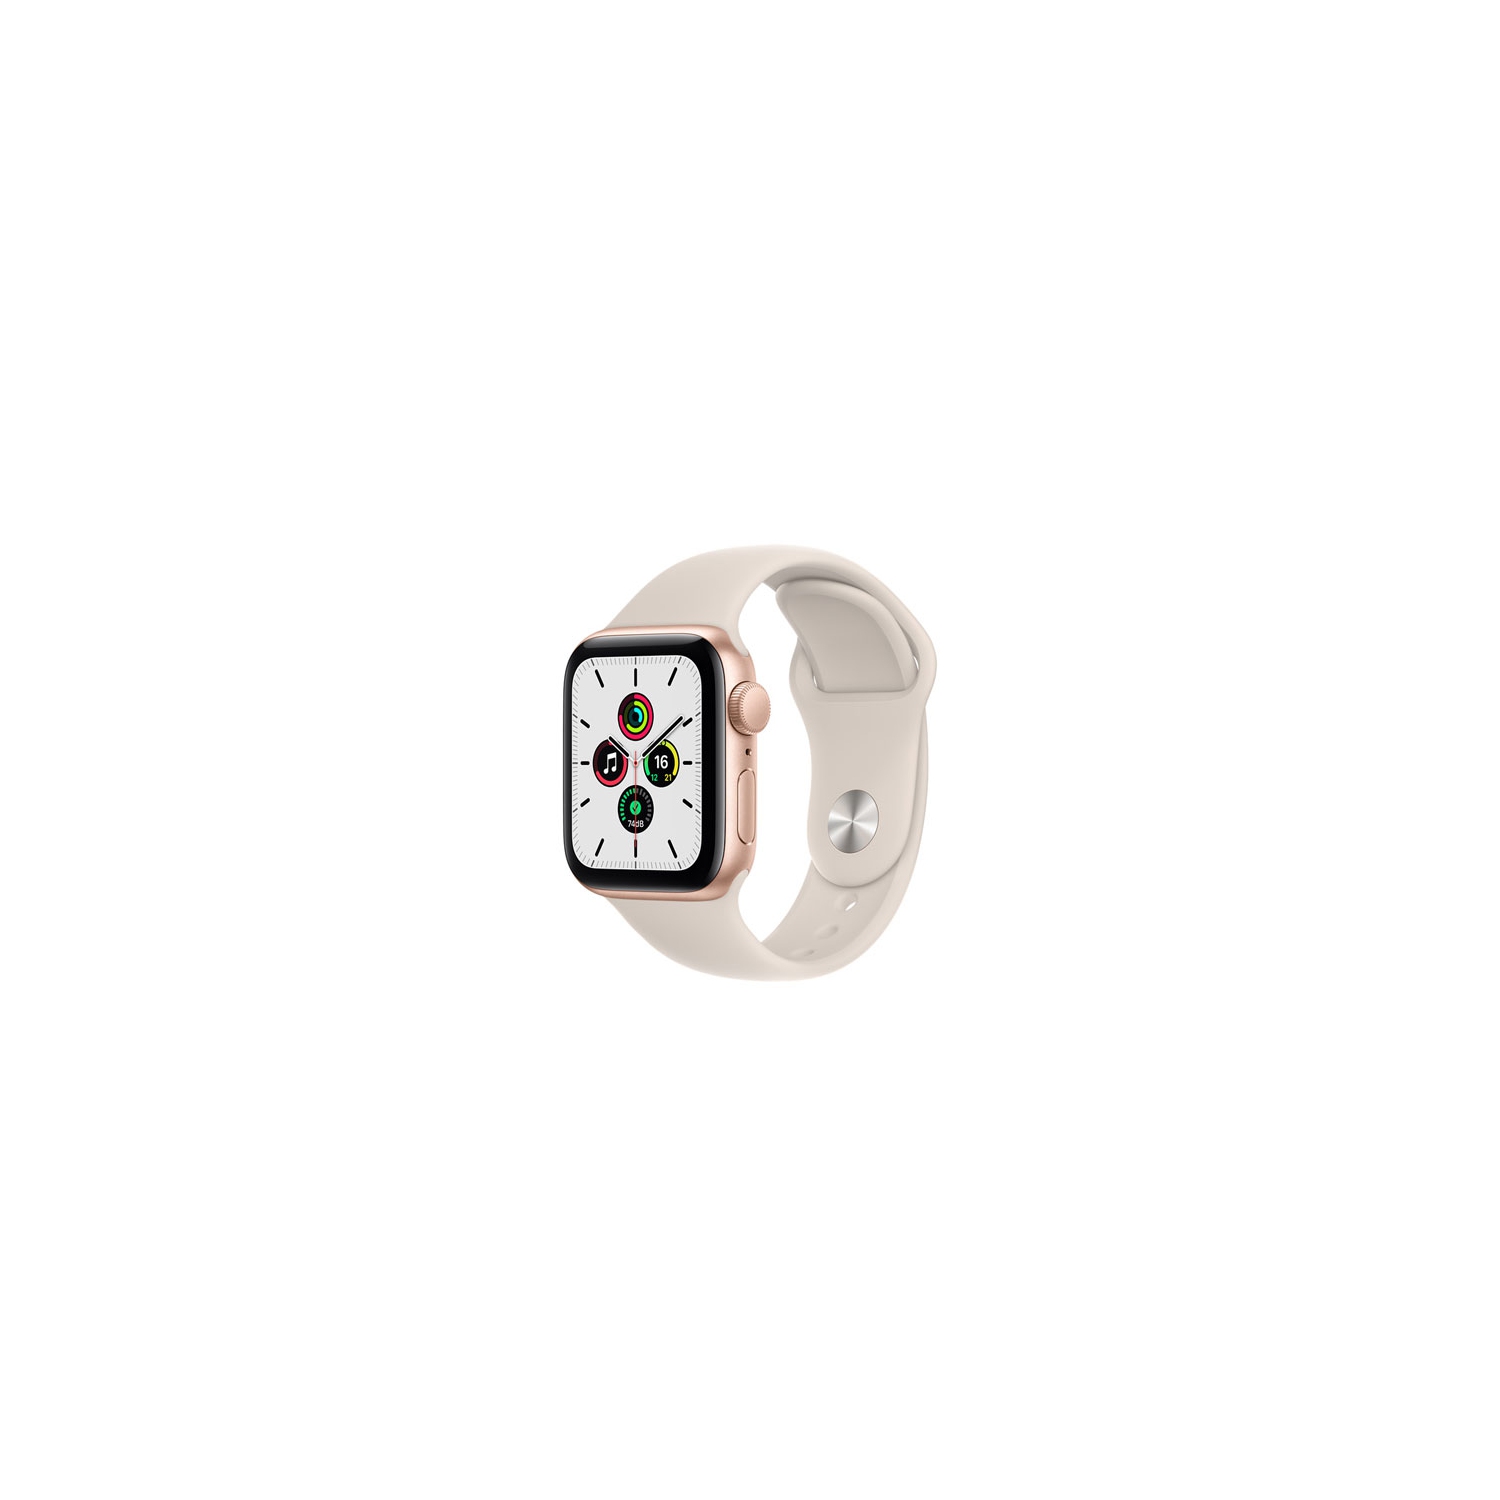 Refurbished (Fair) - Apple Watch SE (GPS) 40mm Gold Aluminum Case with Starlight Sport Band (2021)